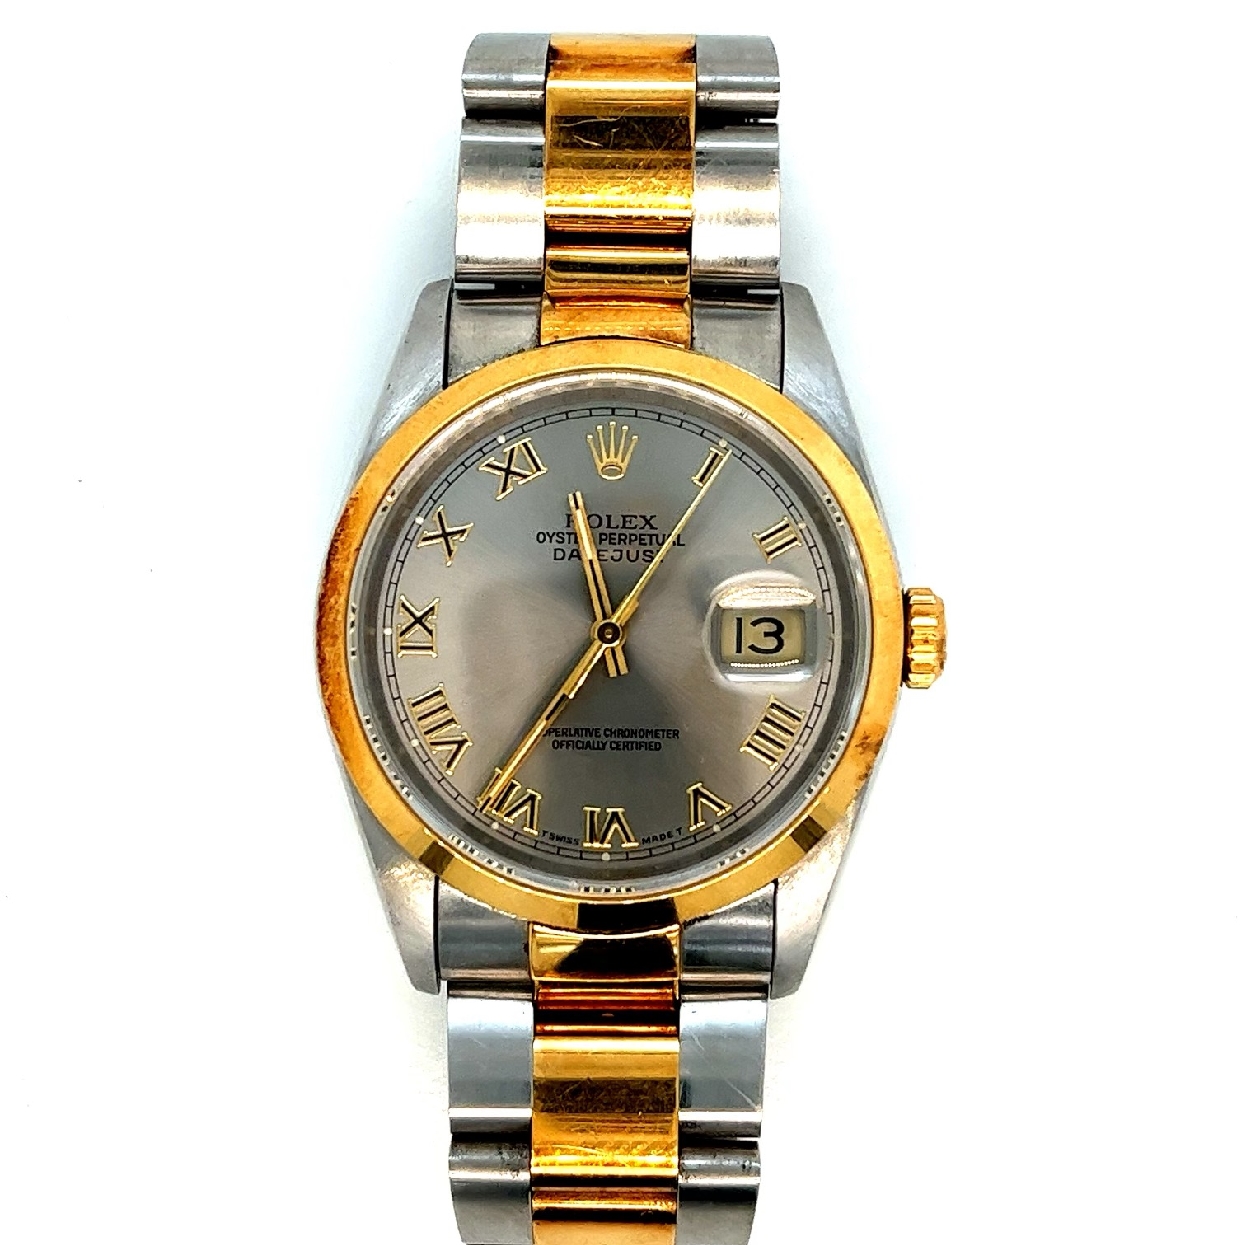 1995 Rhodium Roman Stainless Steel and 18K Yellow Gold Rolex Oyster Perpetual Datejust with Machine Turned Bezel. 

Just Serviced

31 J
Oyster Bracelet

Reference# 16203
Serial# W443161